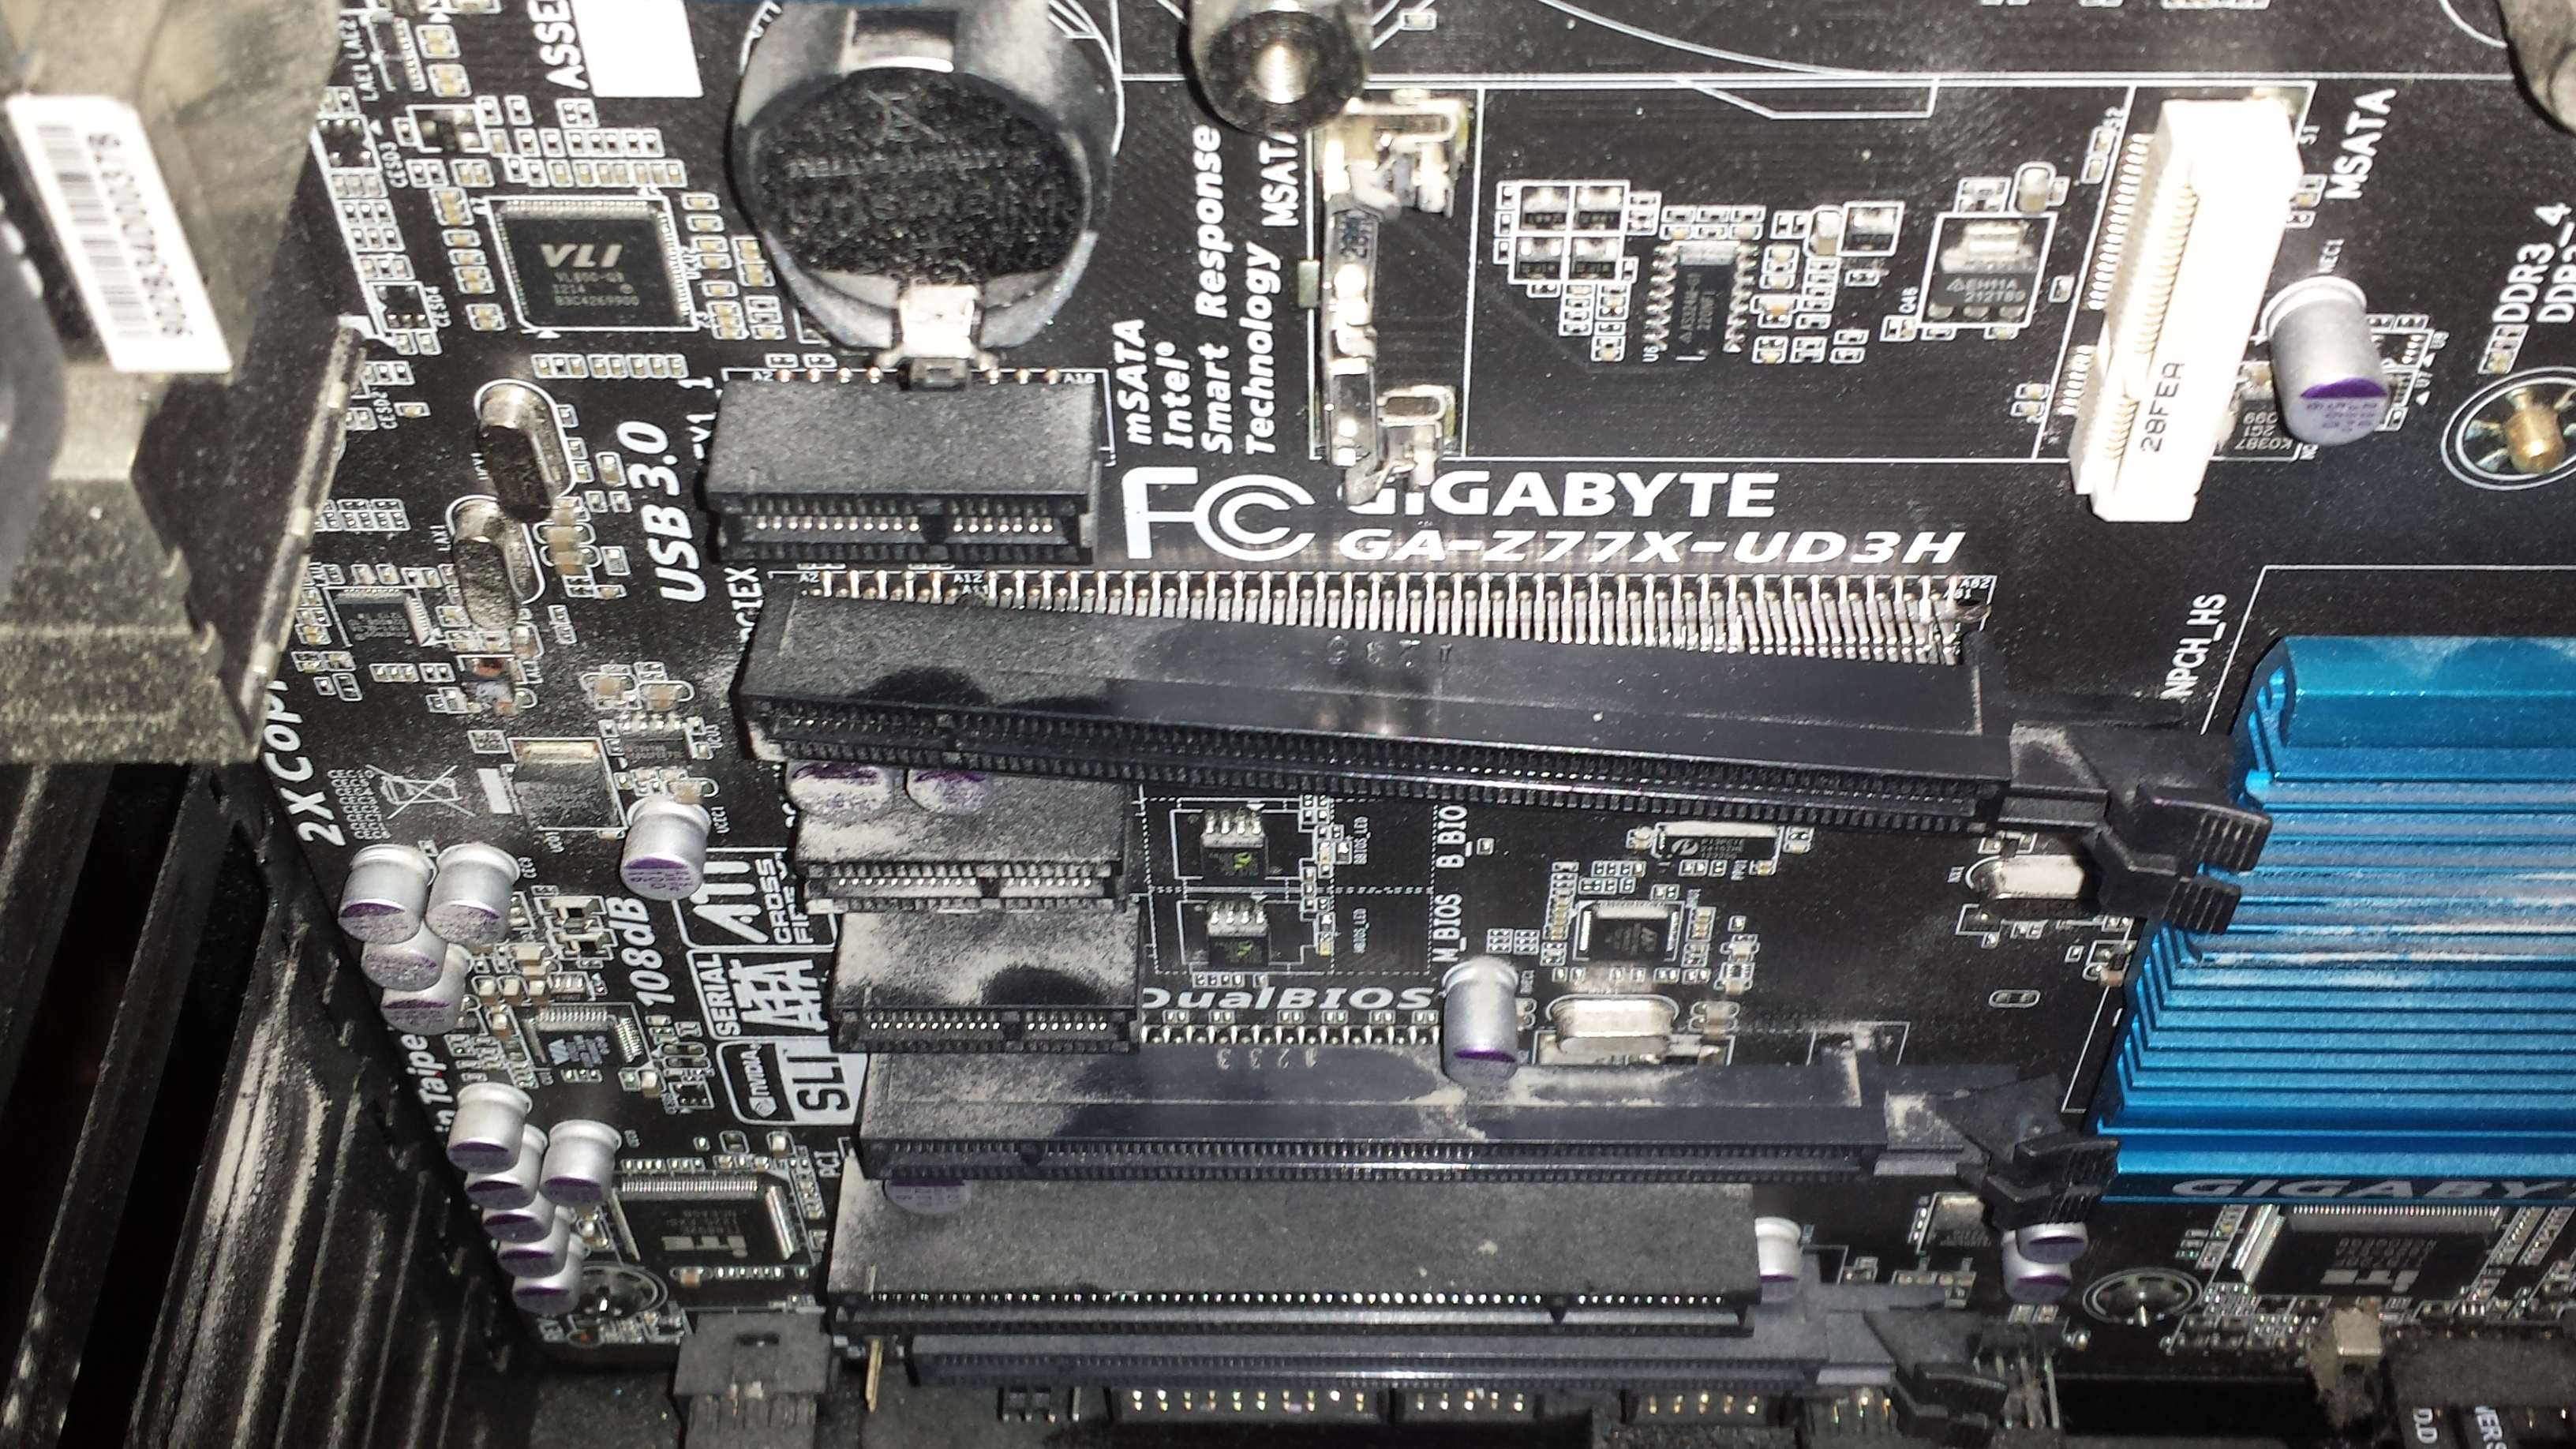 Small snag whilst cleaning, broke pci-e lane | Overclock.net